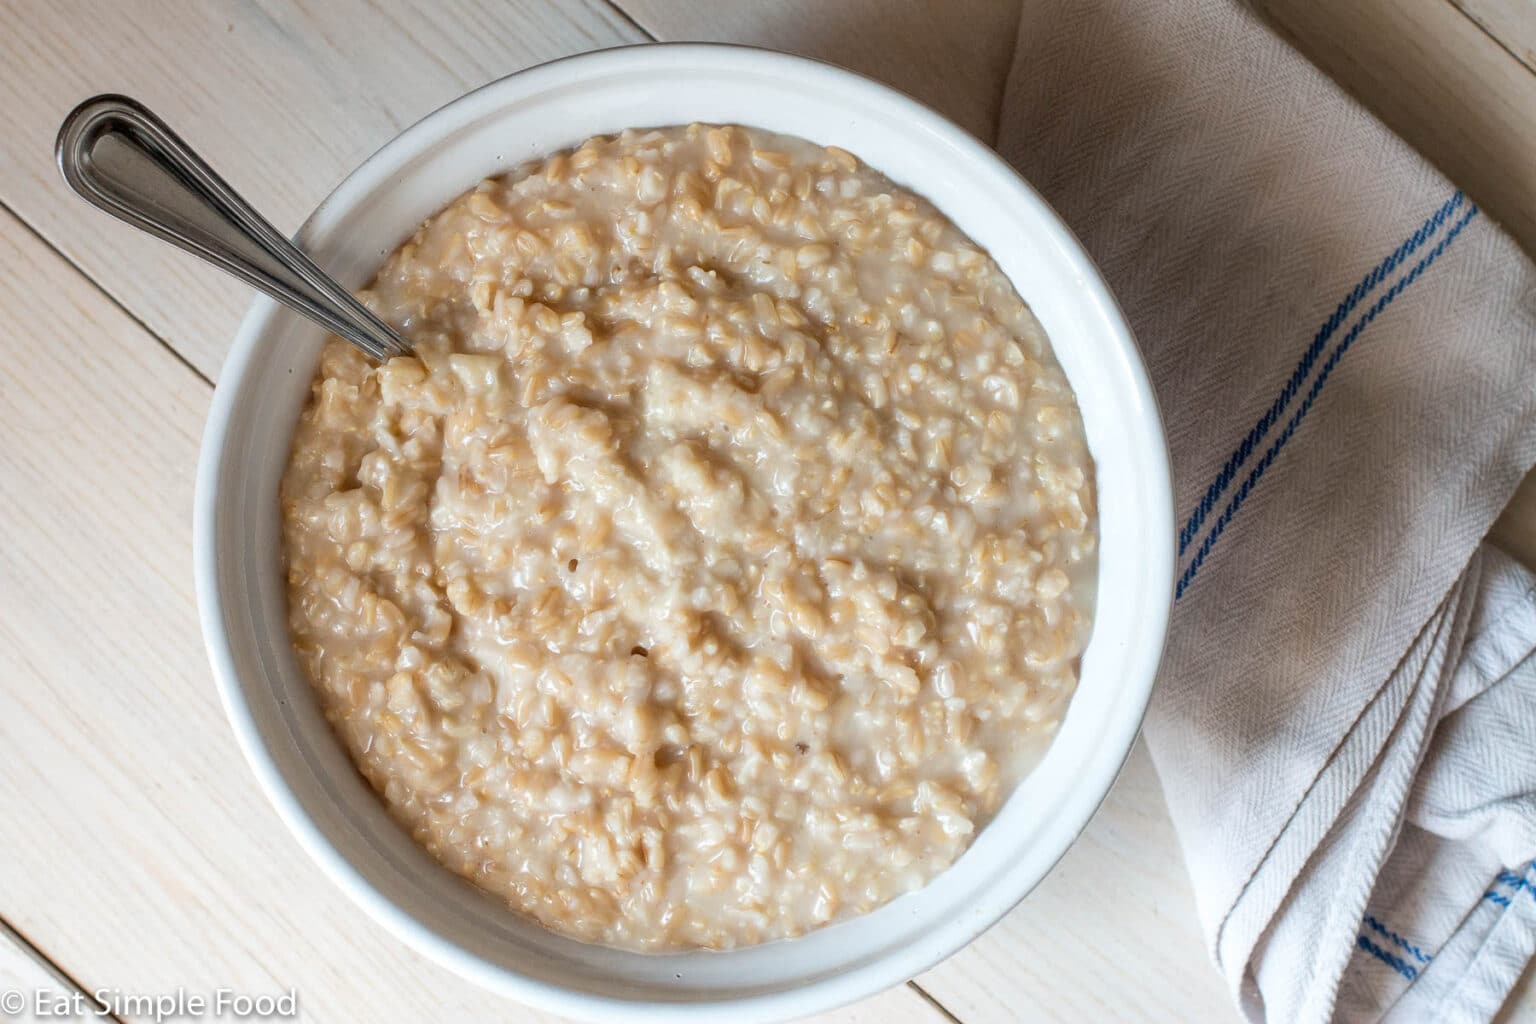 Easy Whole Oat Groats (Oatmeal) Recipe and Video - Eat Simple Food